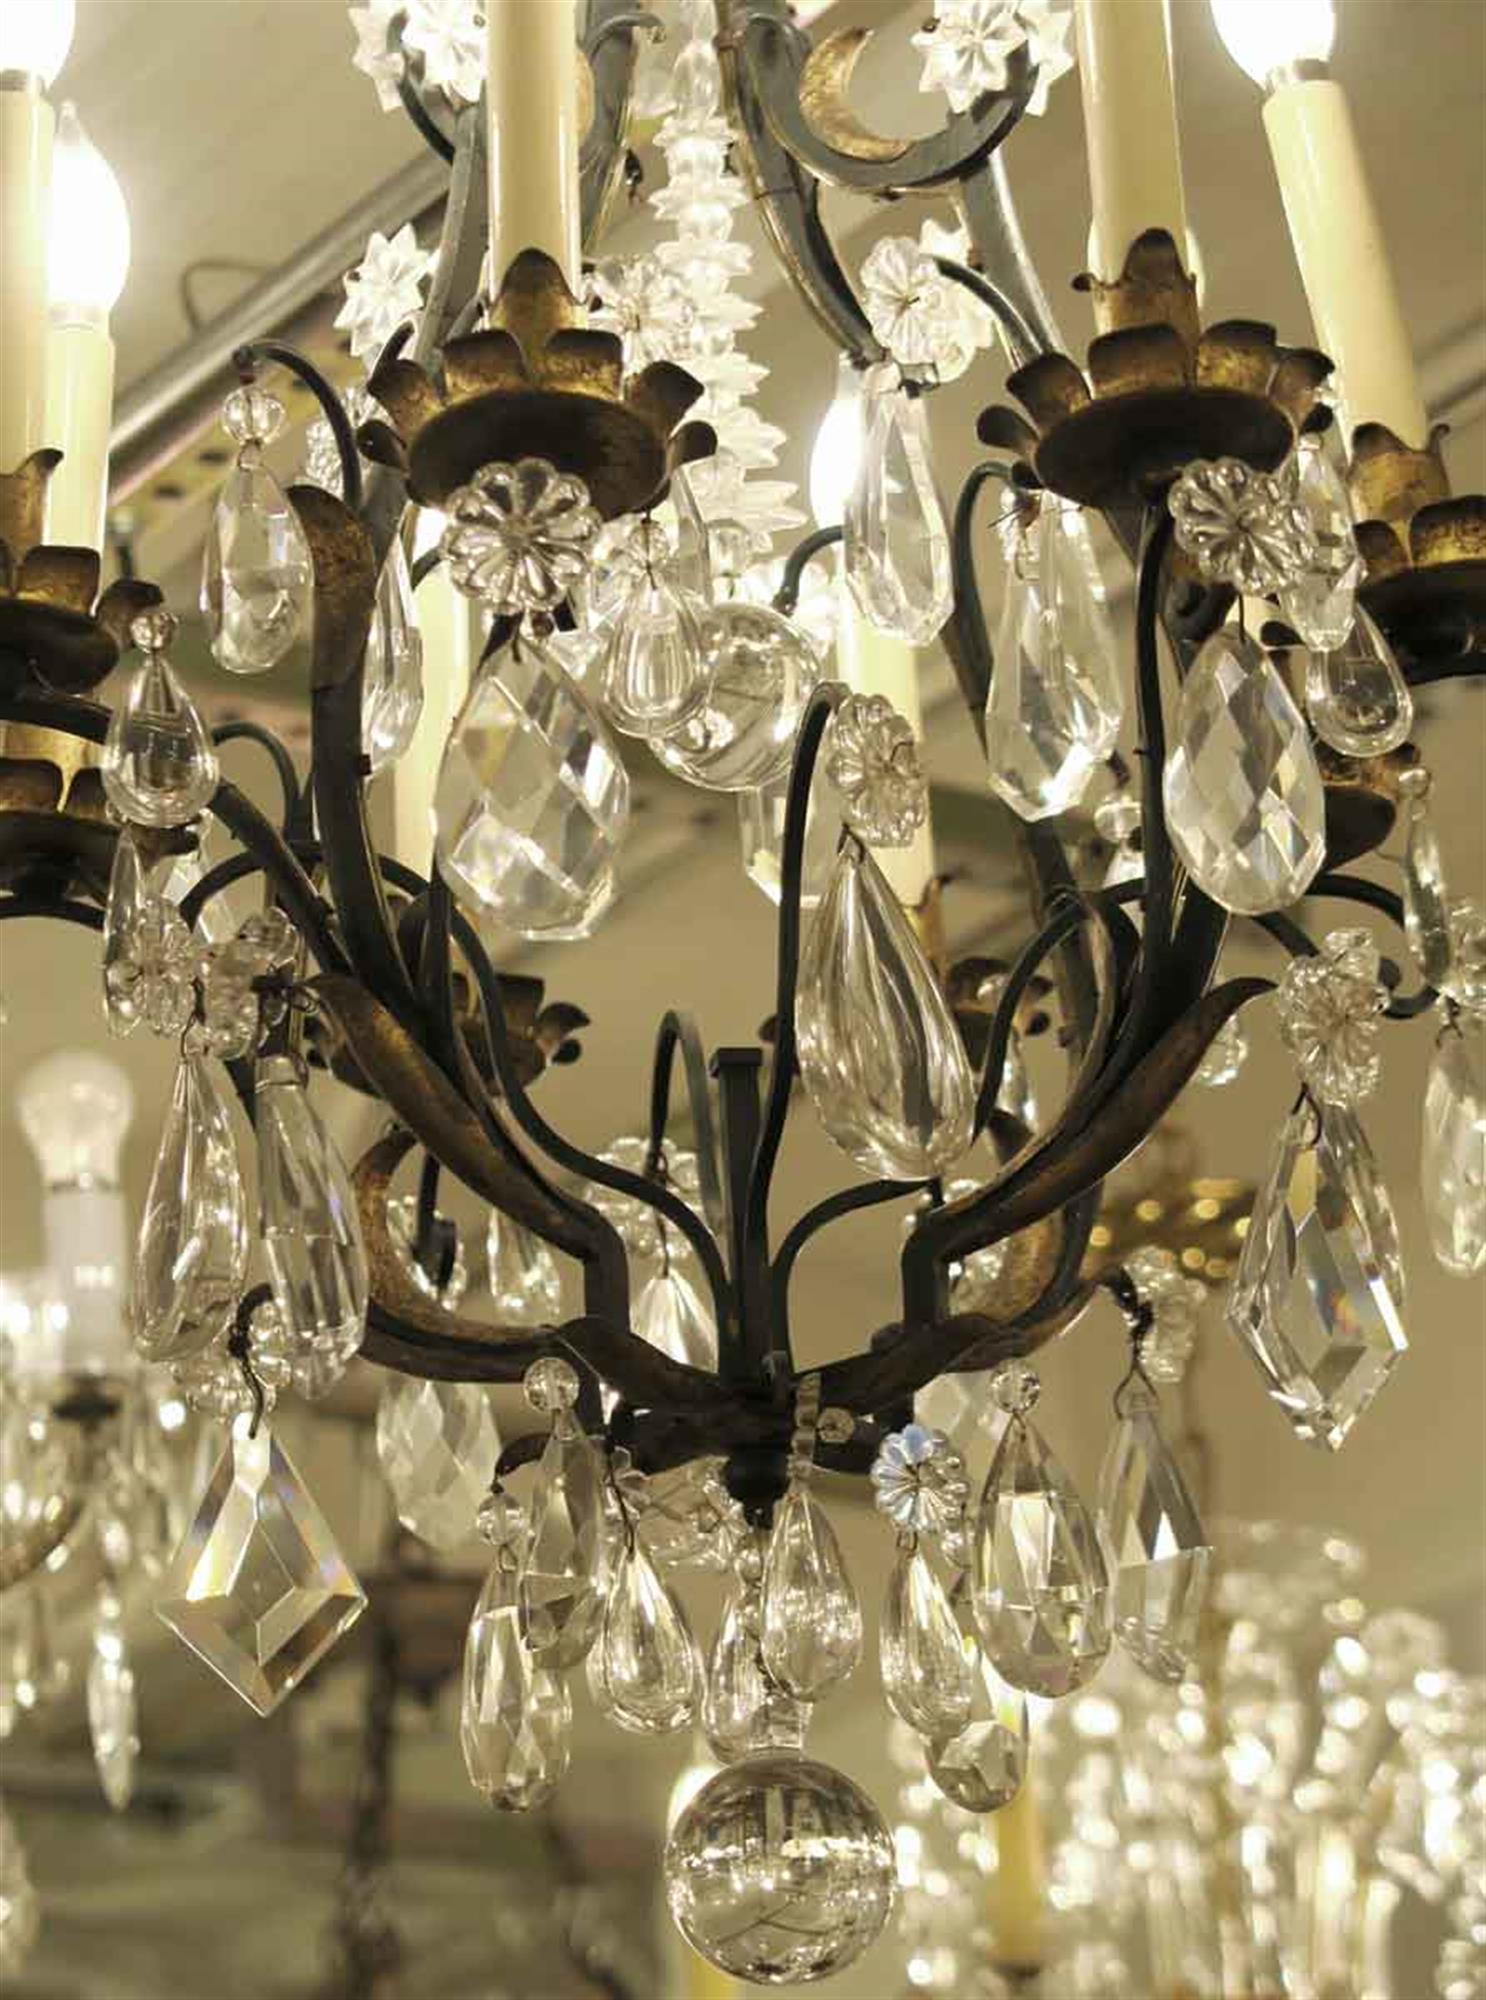 Mid-20th Century 1940s Venetian Iron 6 Light Chandelier Heavy Cut Crystals Gilded Leaves For Sale